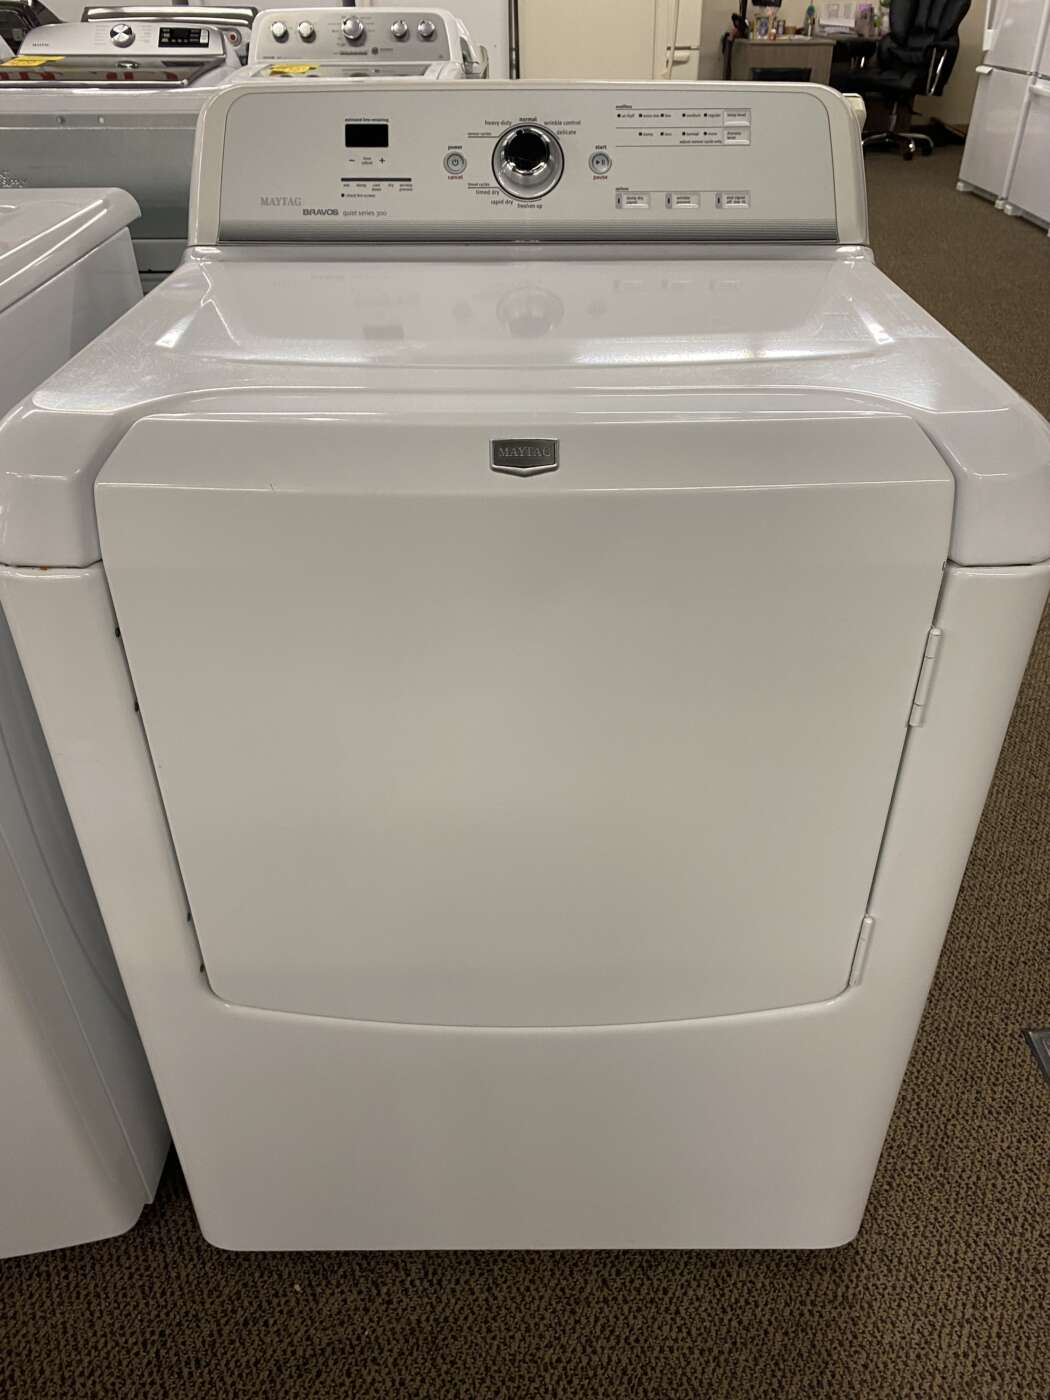 Reconditioned MAYTAG 7.3 Cu. Ft. Electric Dryer – White